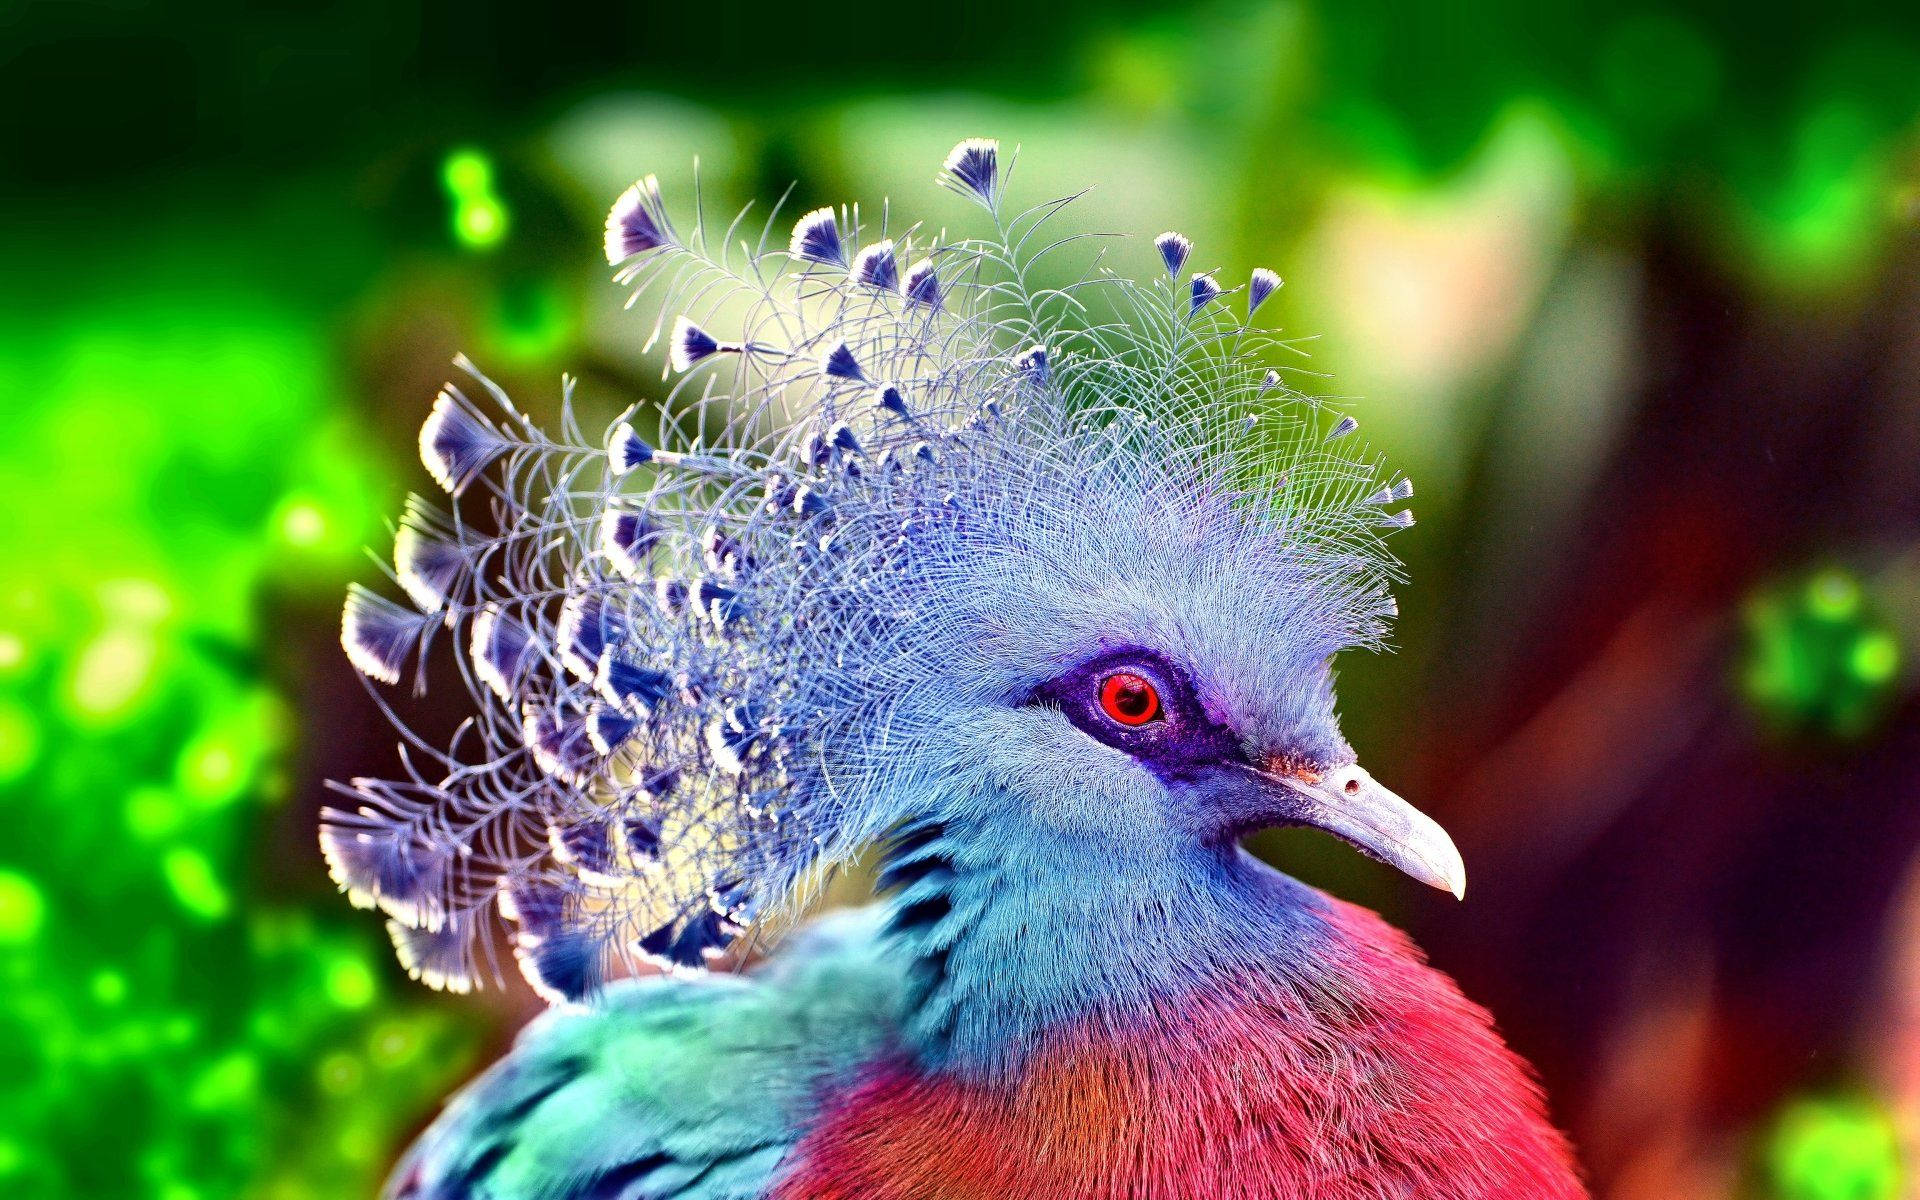 Aesthetic Pigeon Wallpapers  Cool Pigeon Wallpapers for iPhone